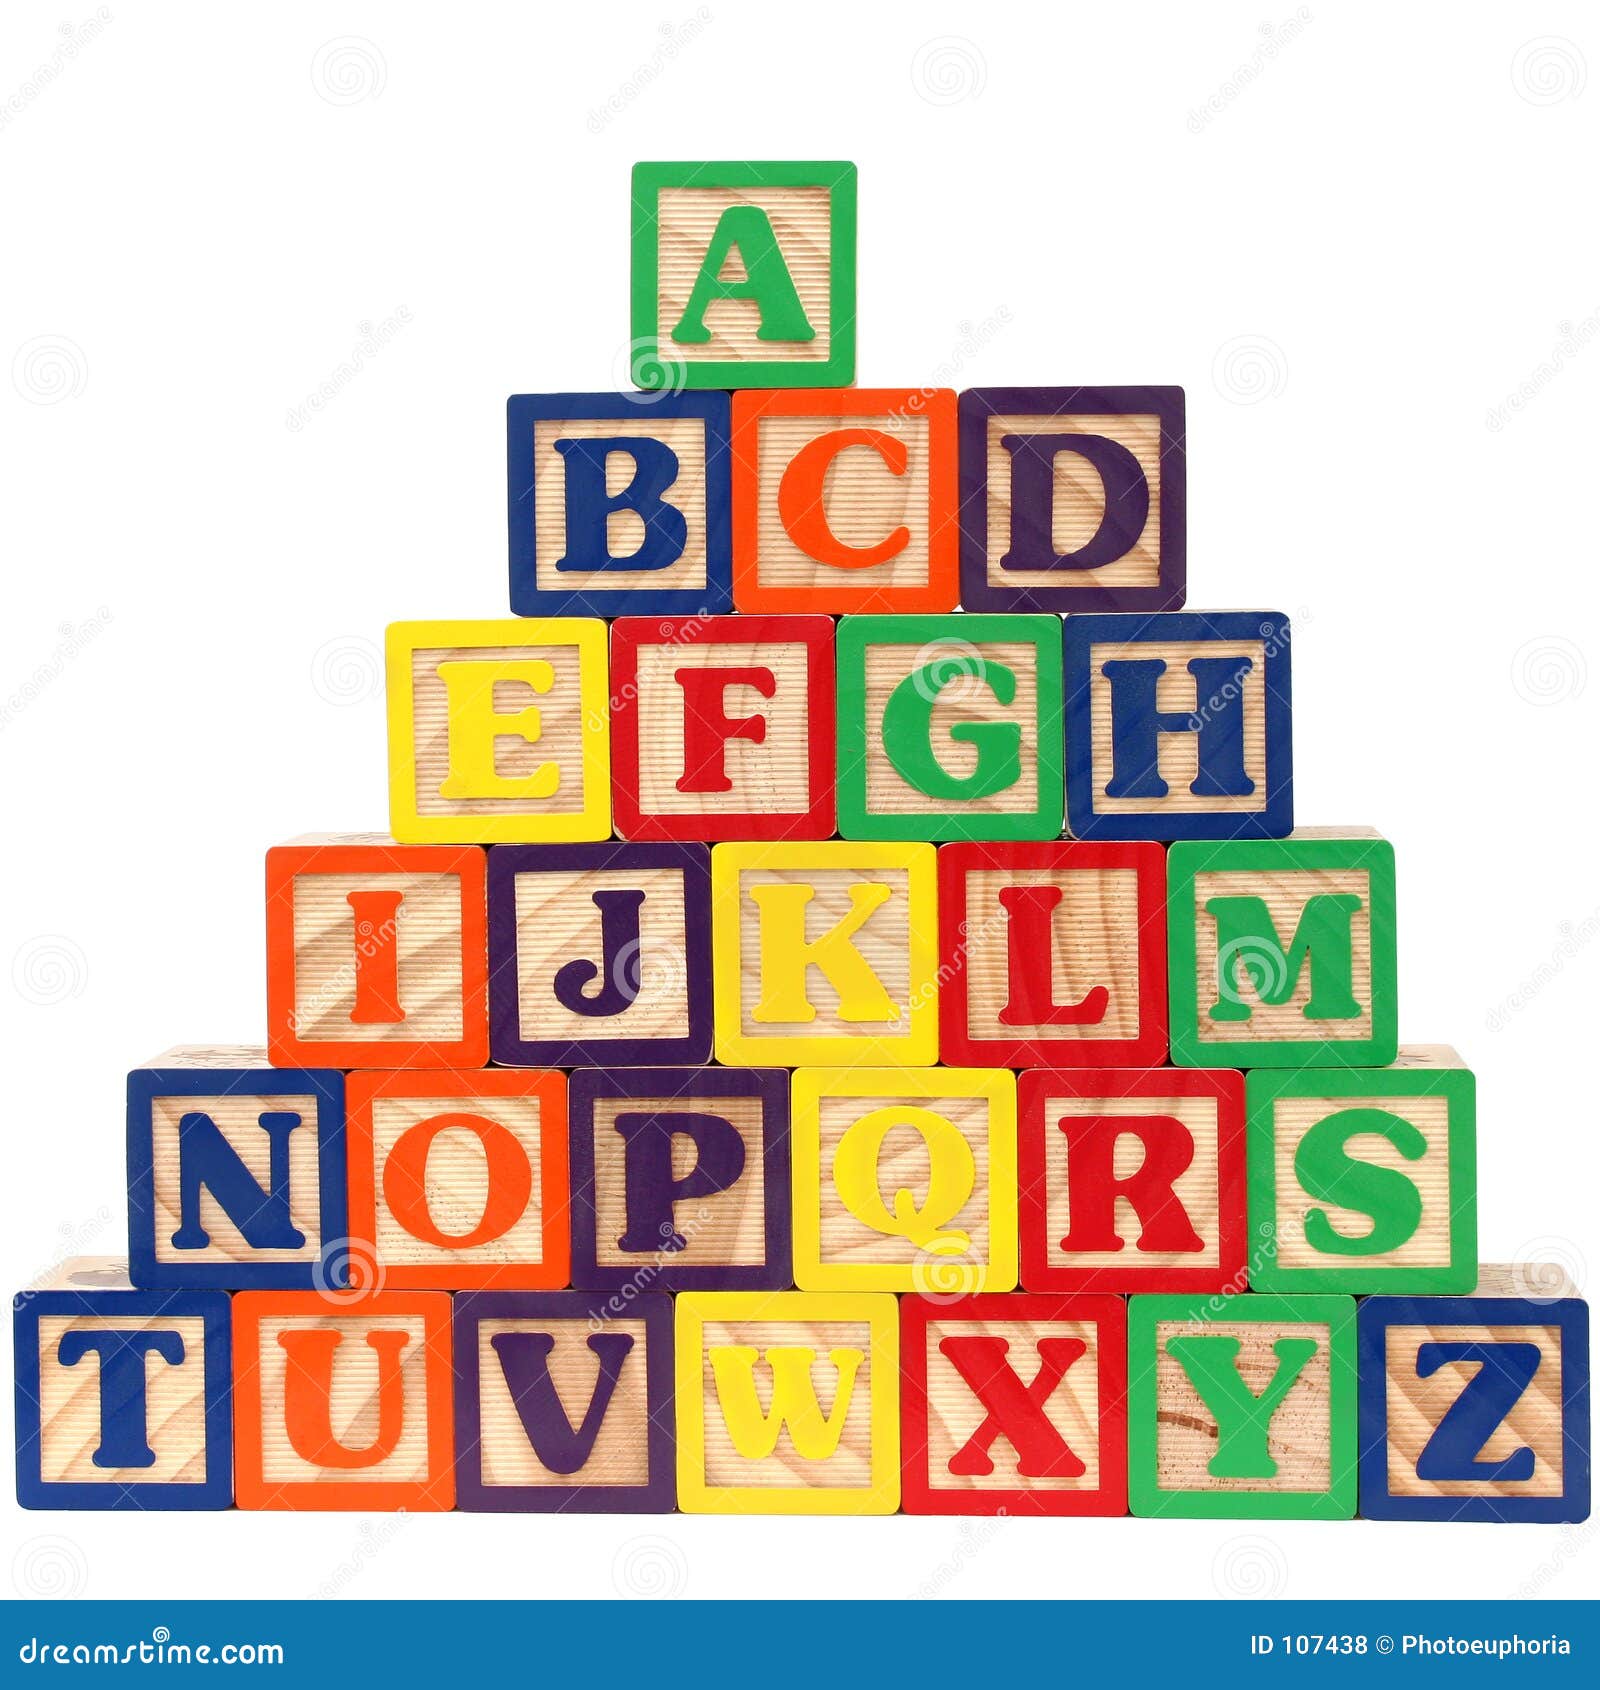 Close-up of ABC blocks A-Z on white background. Shot with a Canon 20D.